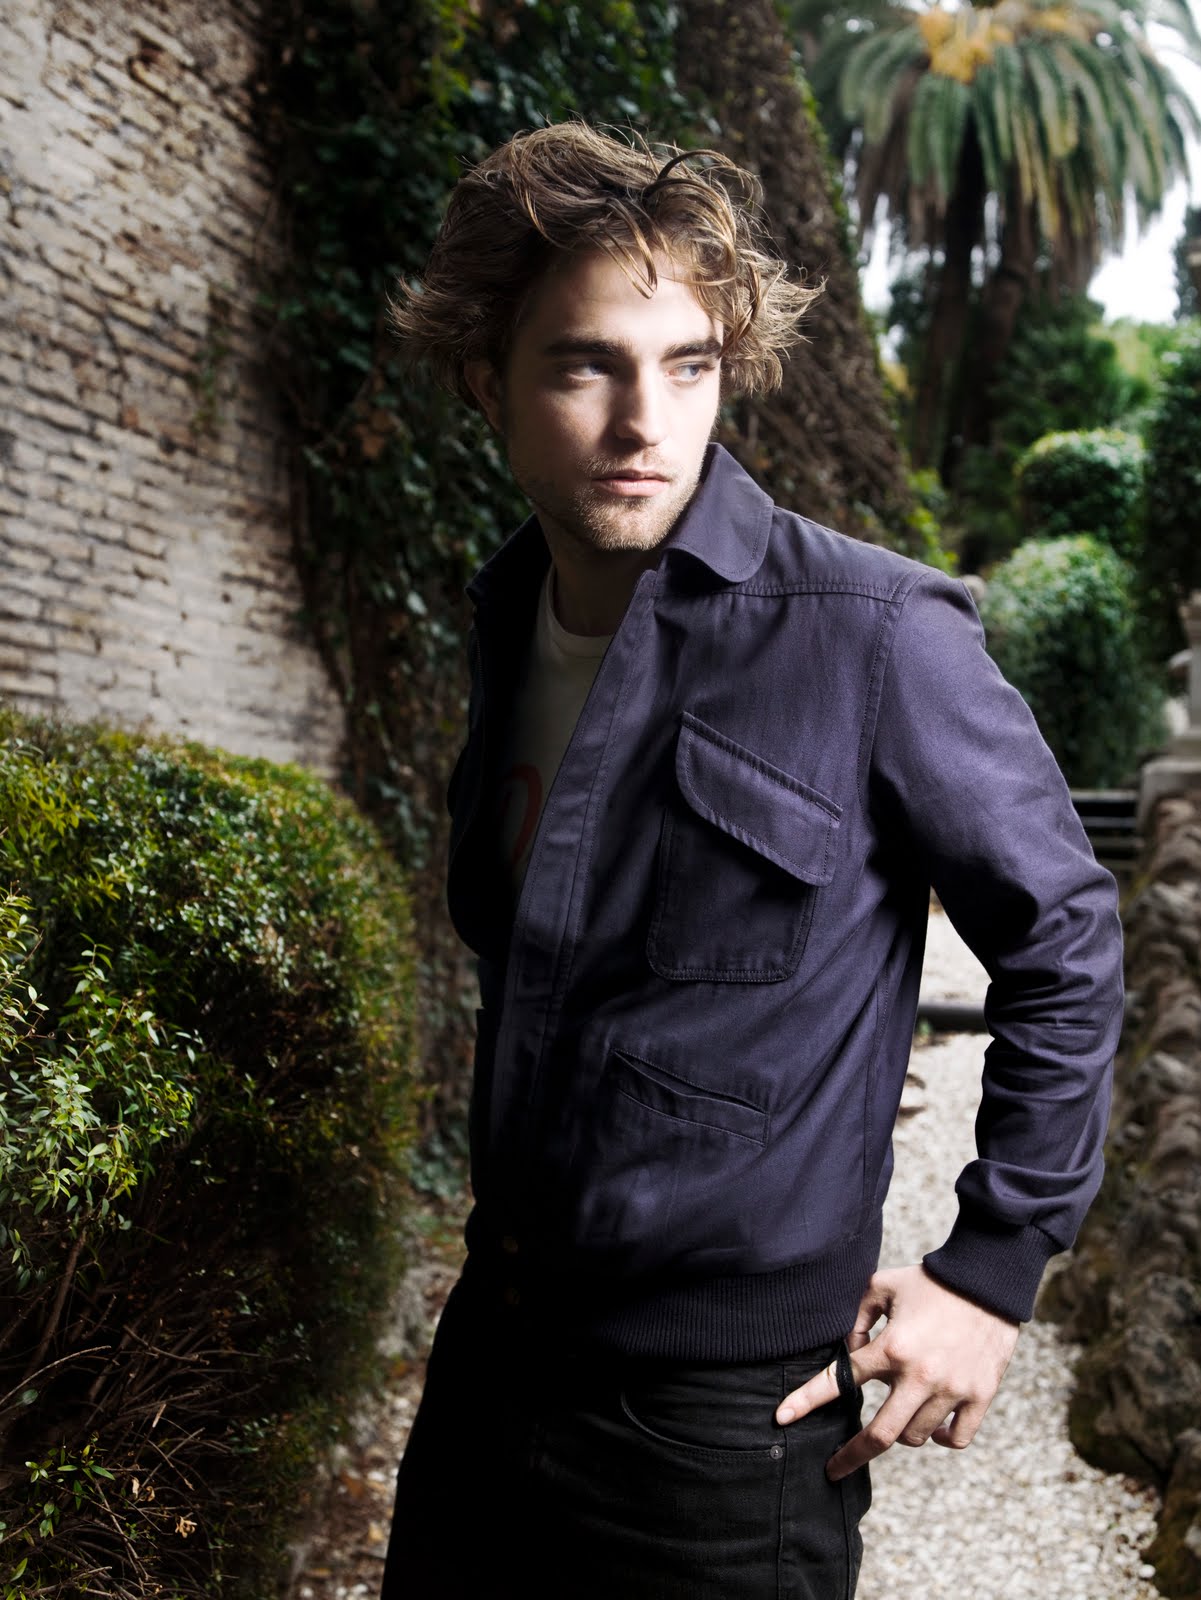 Pattinson Ladies: 3 Old Rob's Outtakes now in UHQ1201 x 1600